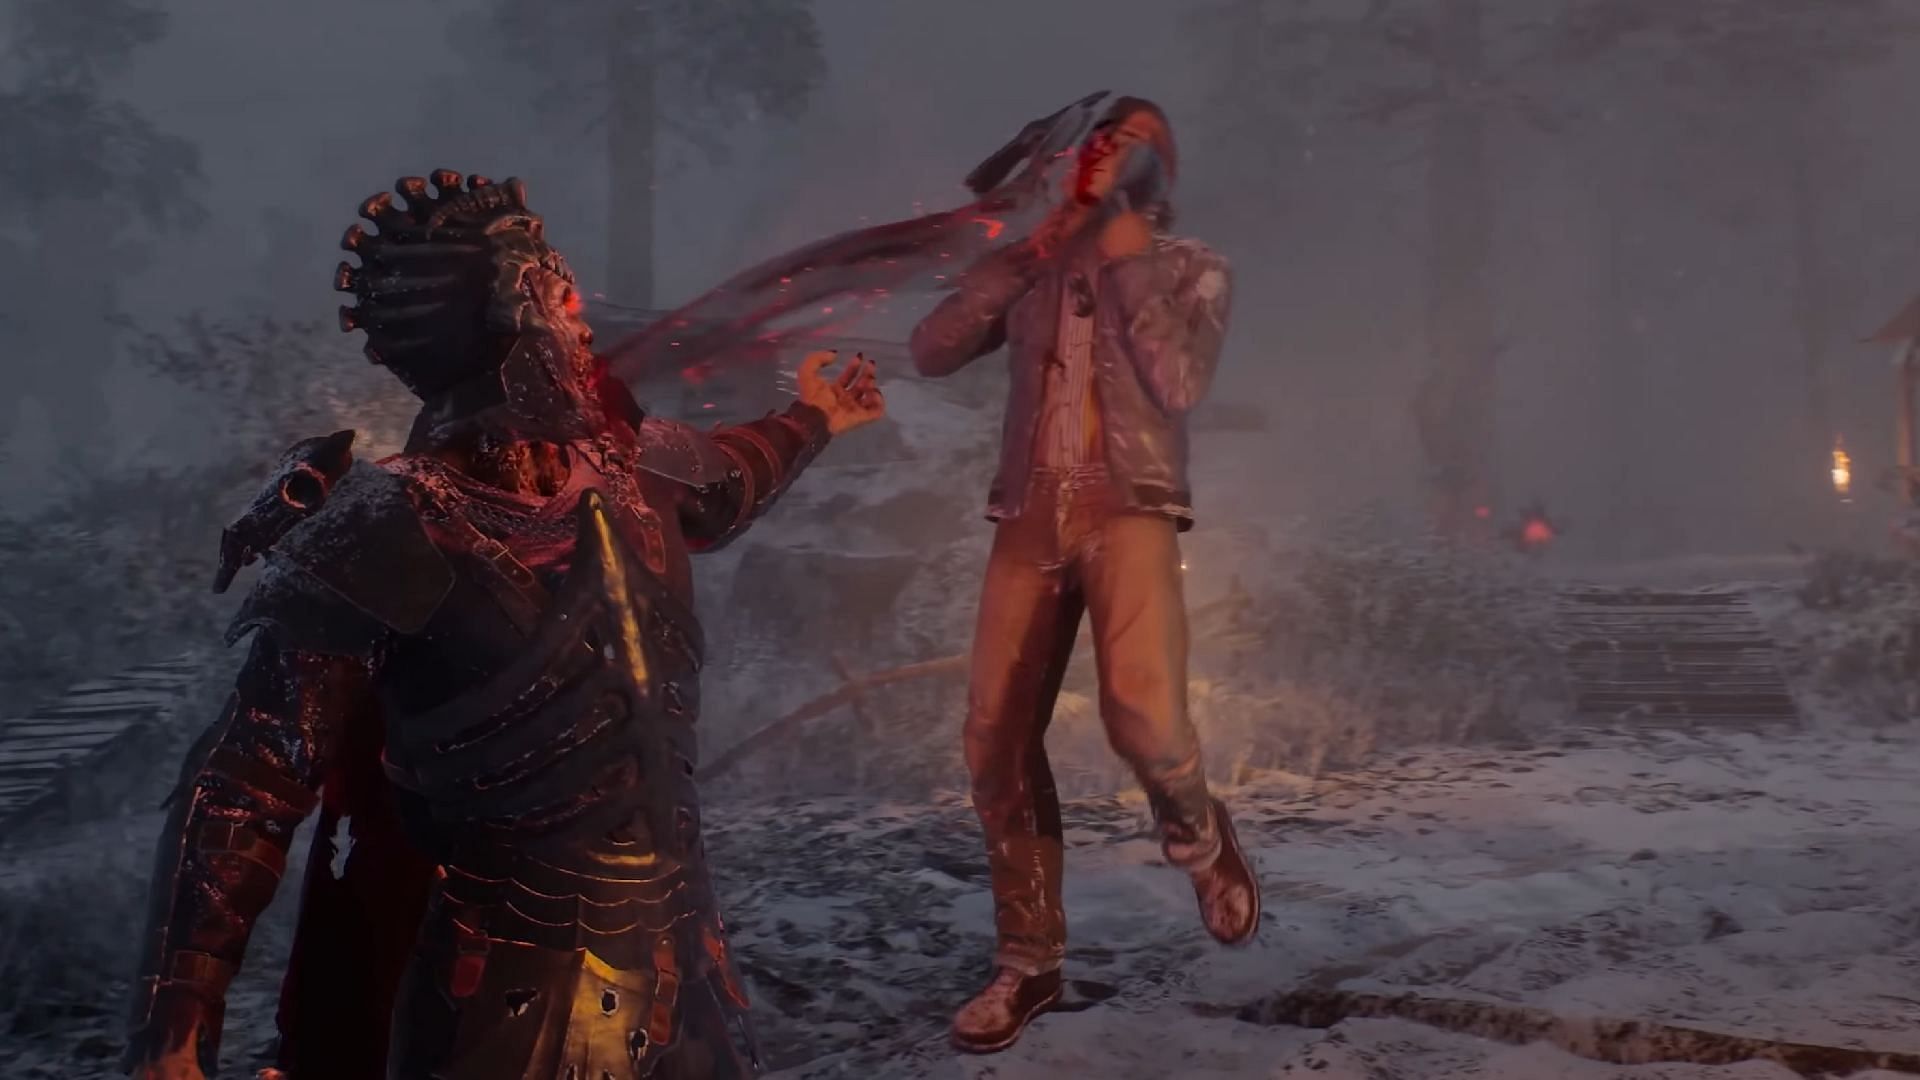 Demon players can pick off Survivors one by one in Evil Dead: The Game (Image via Saber Interactive)